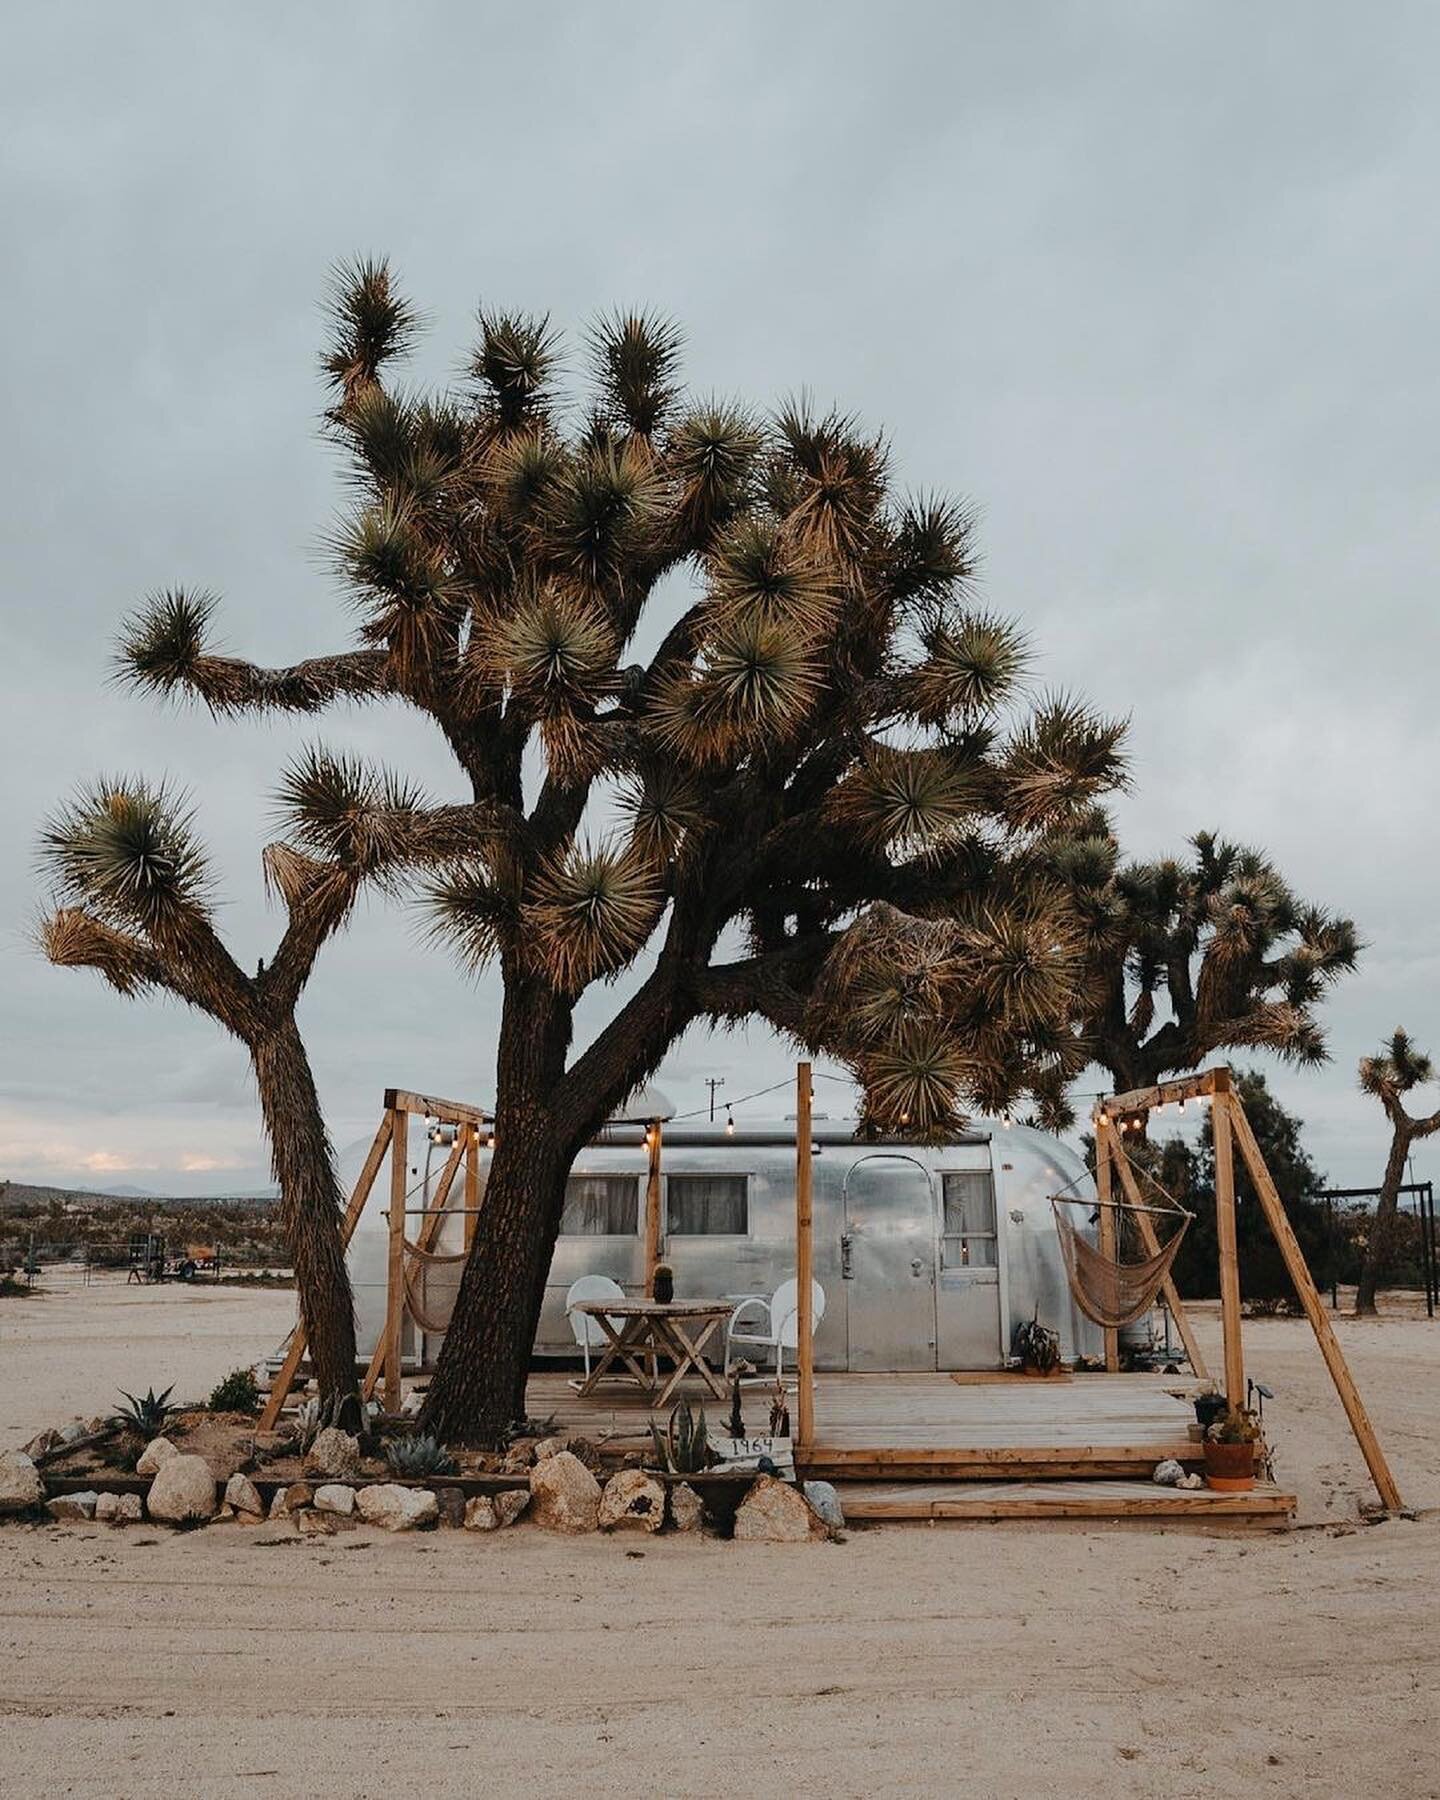 California&rsquo;s Charming Airstream Oasis will transport you back to another era when computers were first being realized and Bruce Springsteen was Born to Run. Come lose yourself among the wild Joshua Tree Acres 💫

📸philngyn